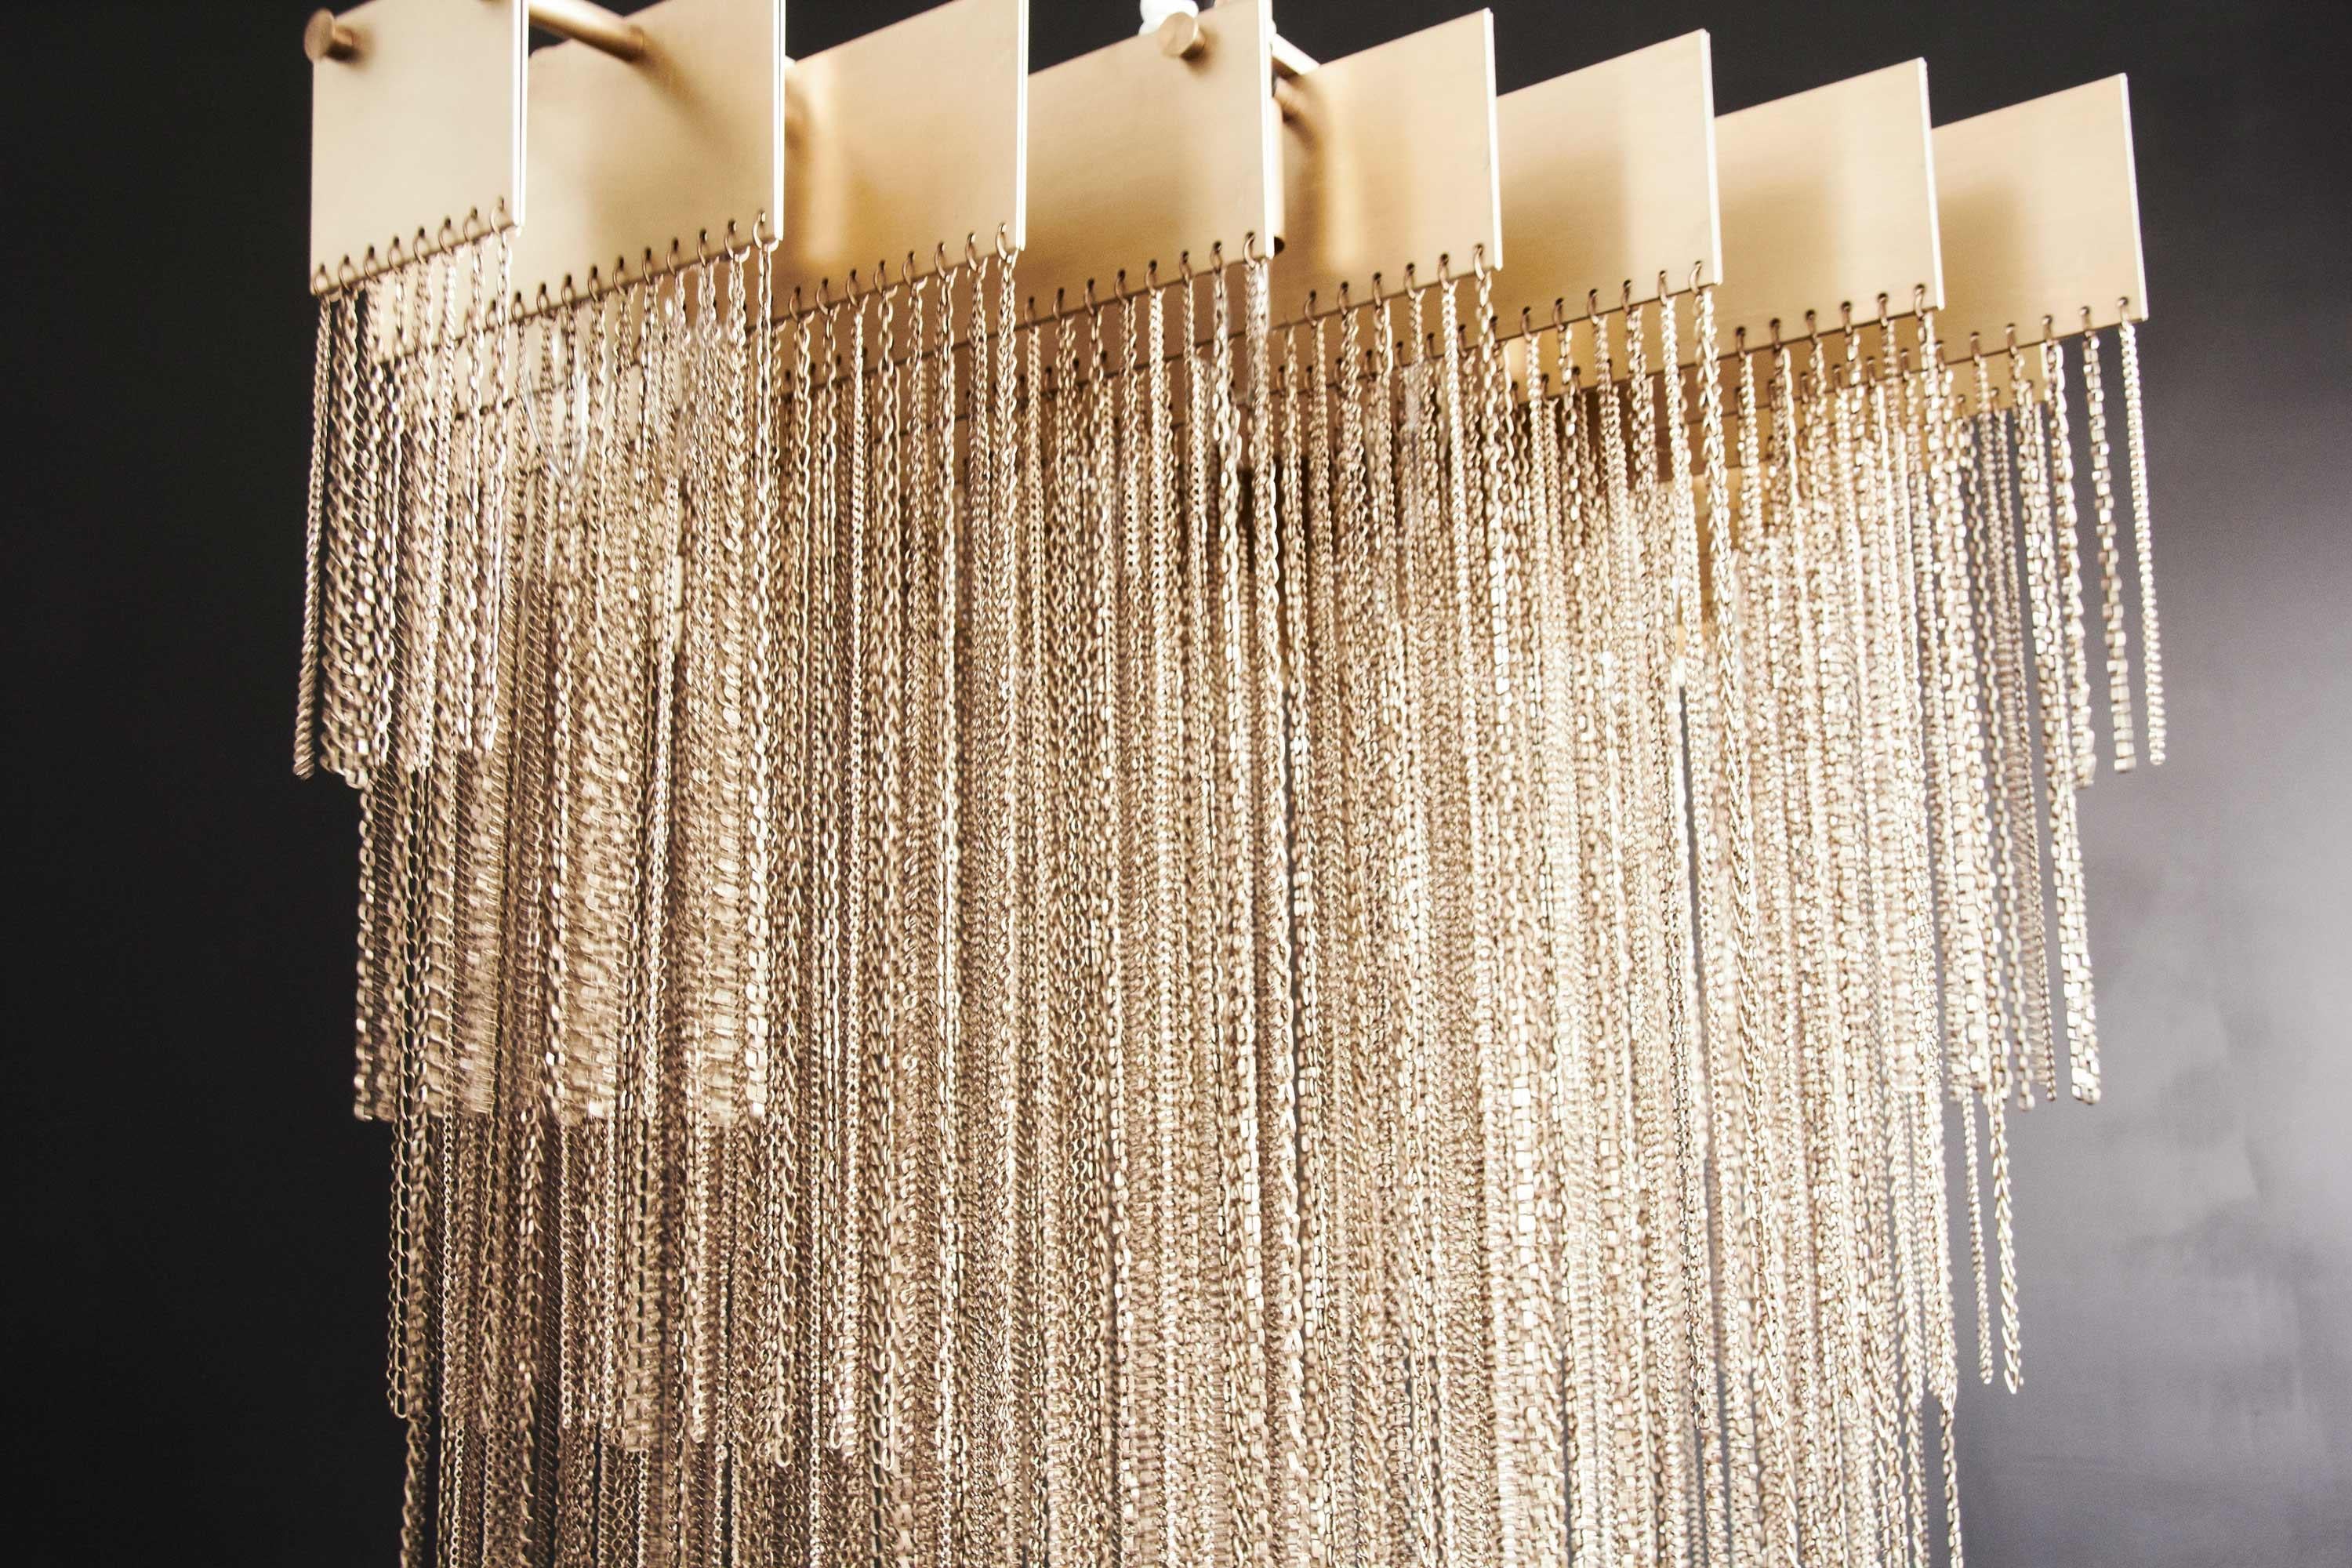 The Kelly chandelier by Gabriel Scott has metallic blades, carrying a half-kilometer of various metallic chains which are symmetrically gathered in an ascending form to create a sculpted geometric mass of glimmering light.